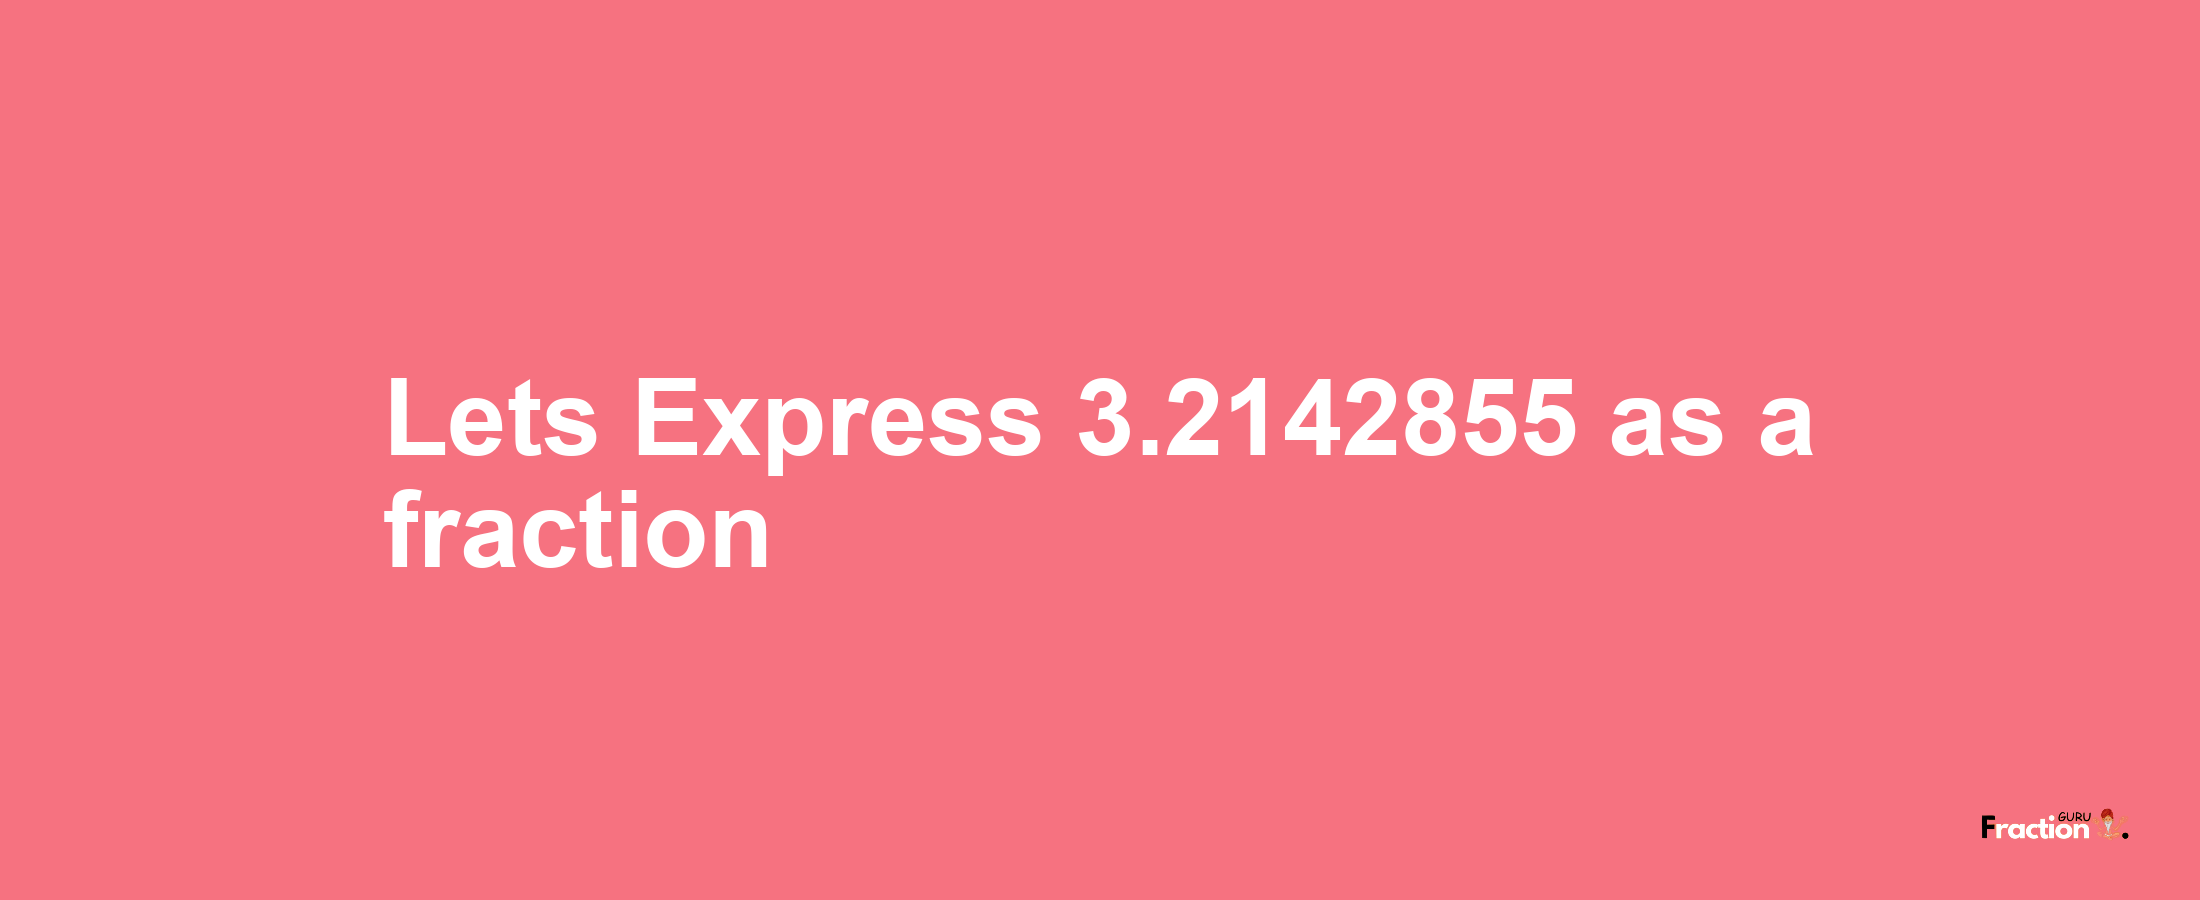 Lets Express 3.2142855 as afraction